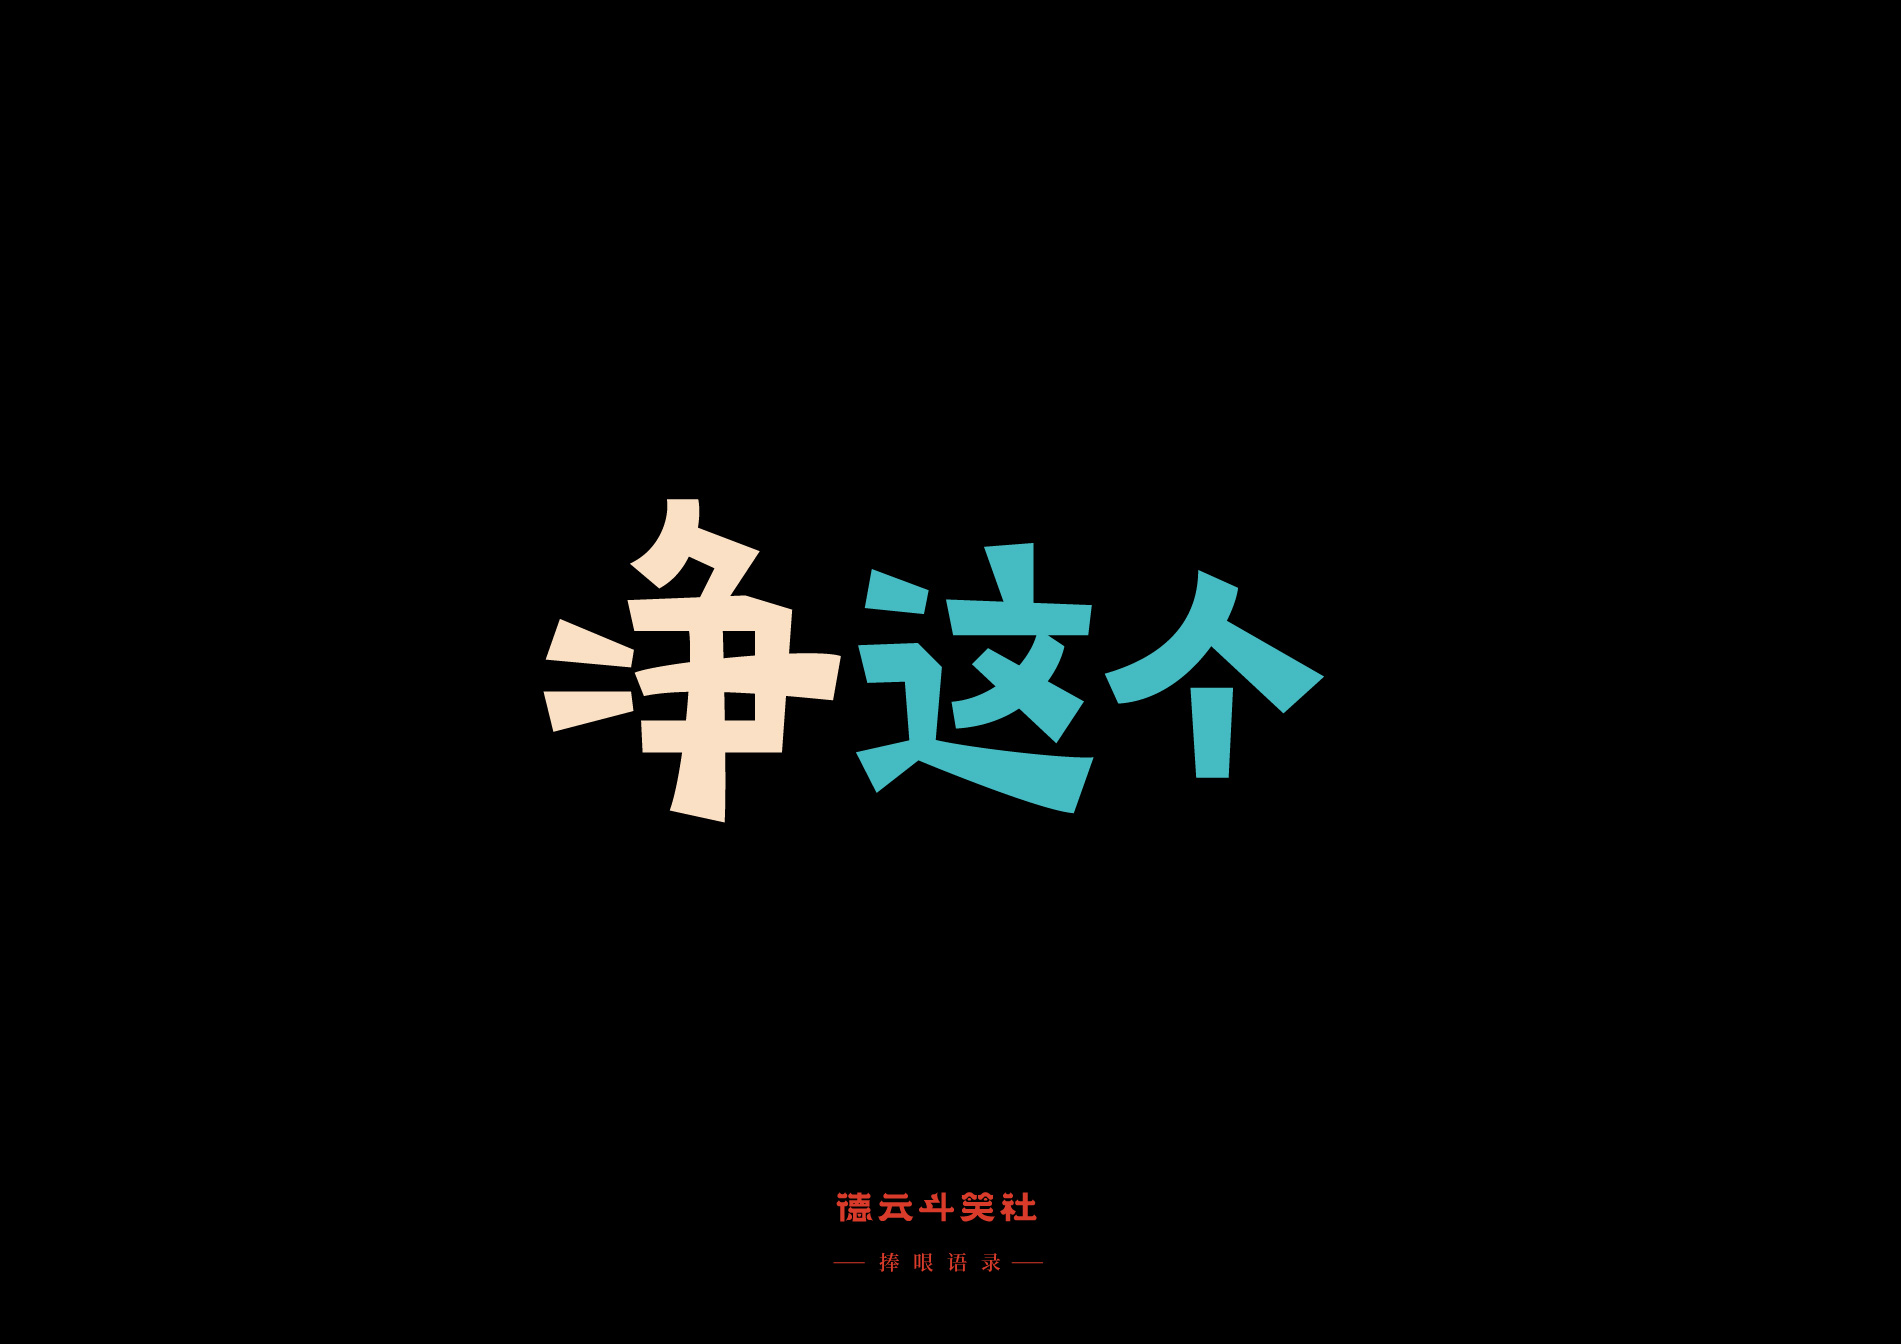 9P Collection of the latest Chinese font design schemes in 2021 #.635